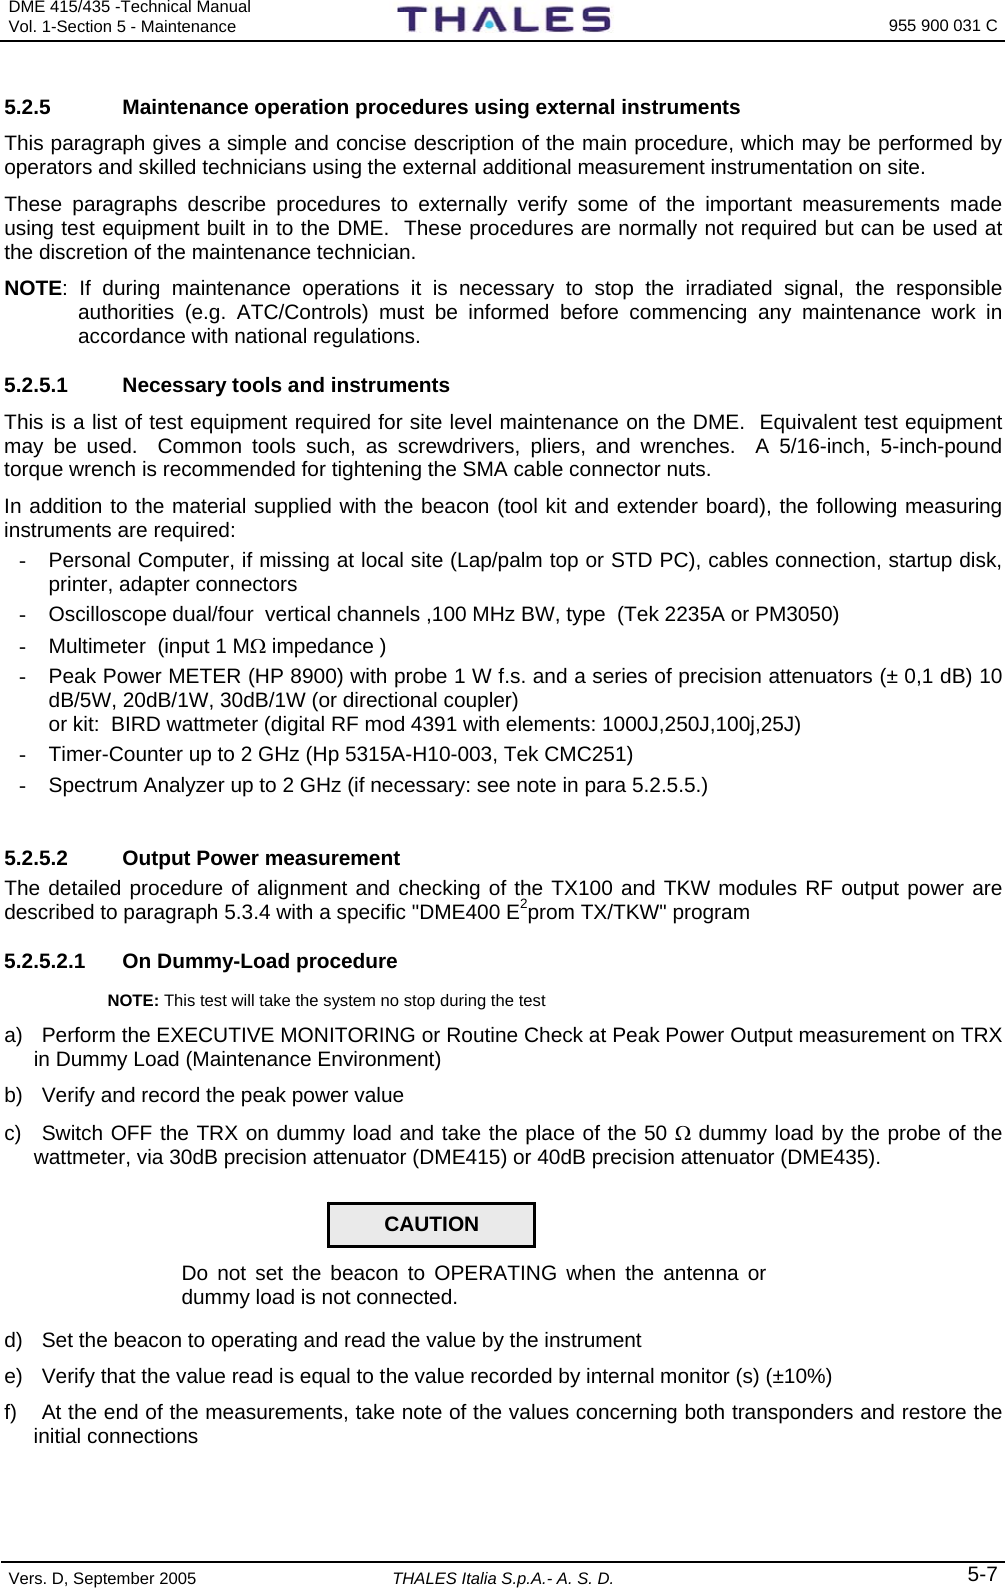 DME 415/435 -Technical Manual Vol. 1-Section 5 - Maintenance    955 900 031 C Vers. D, September 2005  THALES Italia S.p.A.- A. S. D. 5-7 5.2.5  Maintenance operation procedures using external instruments This paragraph gives a simple and concise description of the main procedure, which may be performed by operators and skilled technicians using the external additional measurement instrumentation on site. These paragraphs describe procedures to externally verify some of the important measurements made using test equipment built in to the DME.  These procedures are normally not required but can be used at the discretion of the maintenance technician. NOTE: If during maintenance operations it is necessary to stop the irradiated signal, the responsible authorities (e.g. ATC/Controls) must be informed before commencing any maintenance work in accordance with national regulations.     5.2.5.1  Necessary tools and instruments This is a list of test equipment required for site level maintenance on the DME.  Equivalent test equipment may be used.  Common tools such, as screwdrivers, pliers, and wrenches.  A 5/16-inch, 5-inch-pound torque wrench is recommended for tightening the SMA cable connector nuts. In addition to the material supplied with the beacon (tool kit and extender board), the following measuring instruments are required:  -  Personal Computer, if missing at local site (Lap/palm top or STD PC), cables connection, startup disk, printer, adapter connectors   -  Oscilloscope dual/four  vertical channels ,100 MHz BW, type  (Tek 2235A or PM3050) -  Multimeter  (input 1 MΩ impedance ) -  Peak Power METER (HP 8900) with probe 1 W f.s. and a series of precision attenuators (± 0,1 dB) 10 dB/5W, 20dB/1W, 30dB/1W (or directional coupler)    or kit:  BIRD wattmeter (digital RF mod 4391 with elements: 1000J,250J,100j,25J)  -  Timer-Counter up to 2 GHz (Hp 5315A-H10-003, Tek CMC251) -  Spectrum Analyzer up to 2 GHz (if necessary: see note in para 5.2.5.5.)   5.2.5.2  Output Power measurement The detailed procedure of alignment and checking of the TX100 and TKW modules RF output power are described to paragraph 5.3.4 with a specific &quot;DME400 E2prom TX/TKW&quot; program 5.2.5.2.1  On Dummy-Load procedure  NOTE: This test will take the system no stop during the test  a)  Perform the EXECUTIVE MONITORING or Routine Check at Peak Power Output measurement on TRX in Dummy Load (Maintenance Environment) b)  Verify and record the peak power value c)  Switch OFF the TRX on dummy load and take the place of the 50 Ω dummy load by the probe of the wattmeter, via 30dB precision attenuator (DME415) or 40dB precision attenuator (DME435).   Do not set the beacon to OPERATING when the antenna or dummy load is not connected. d)  Set the beacon to operating and read the value by the instrument e)  Verify that the value read is equal to the value recorded by internal monitor (s) (±10%) f)  At the end of the measurements, take note of the values concerning both transponders and restore the initial connections CAUTION 